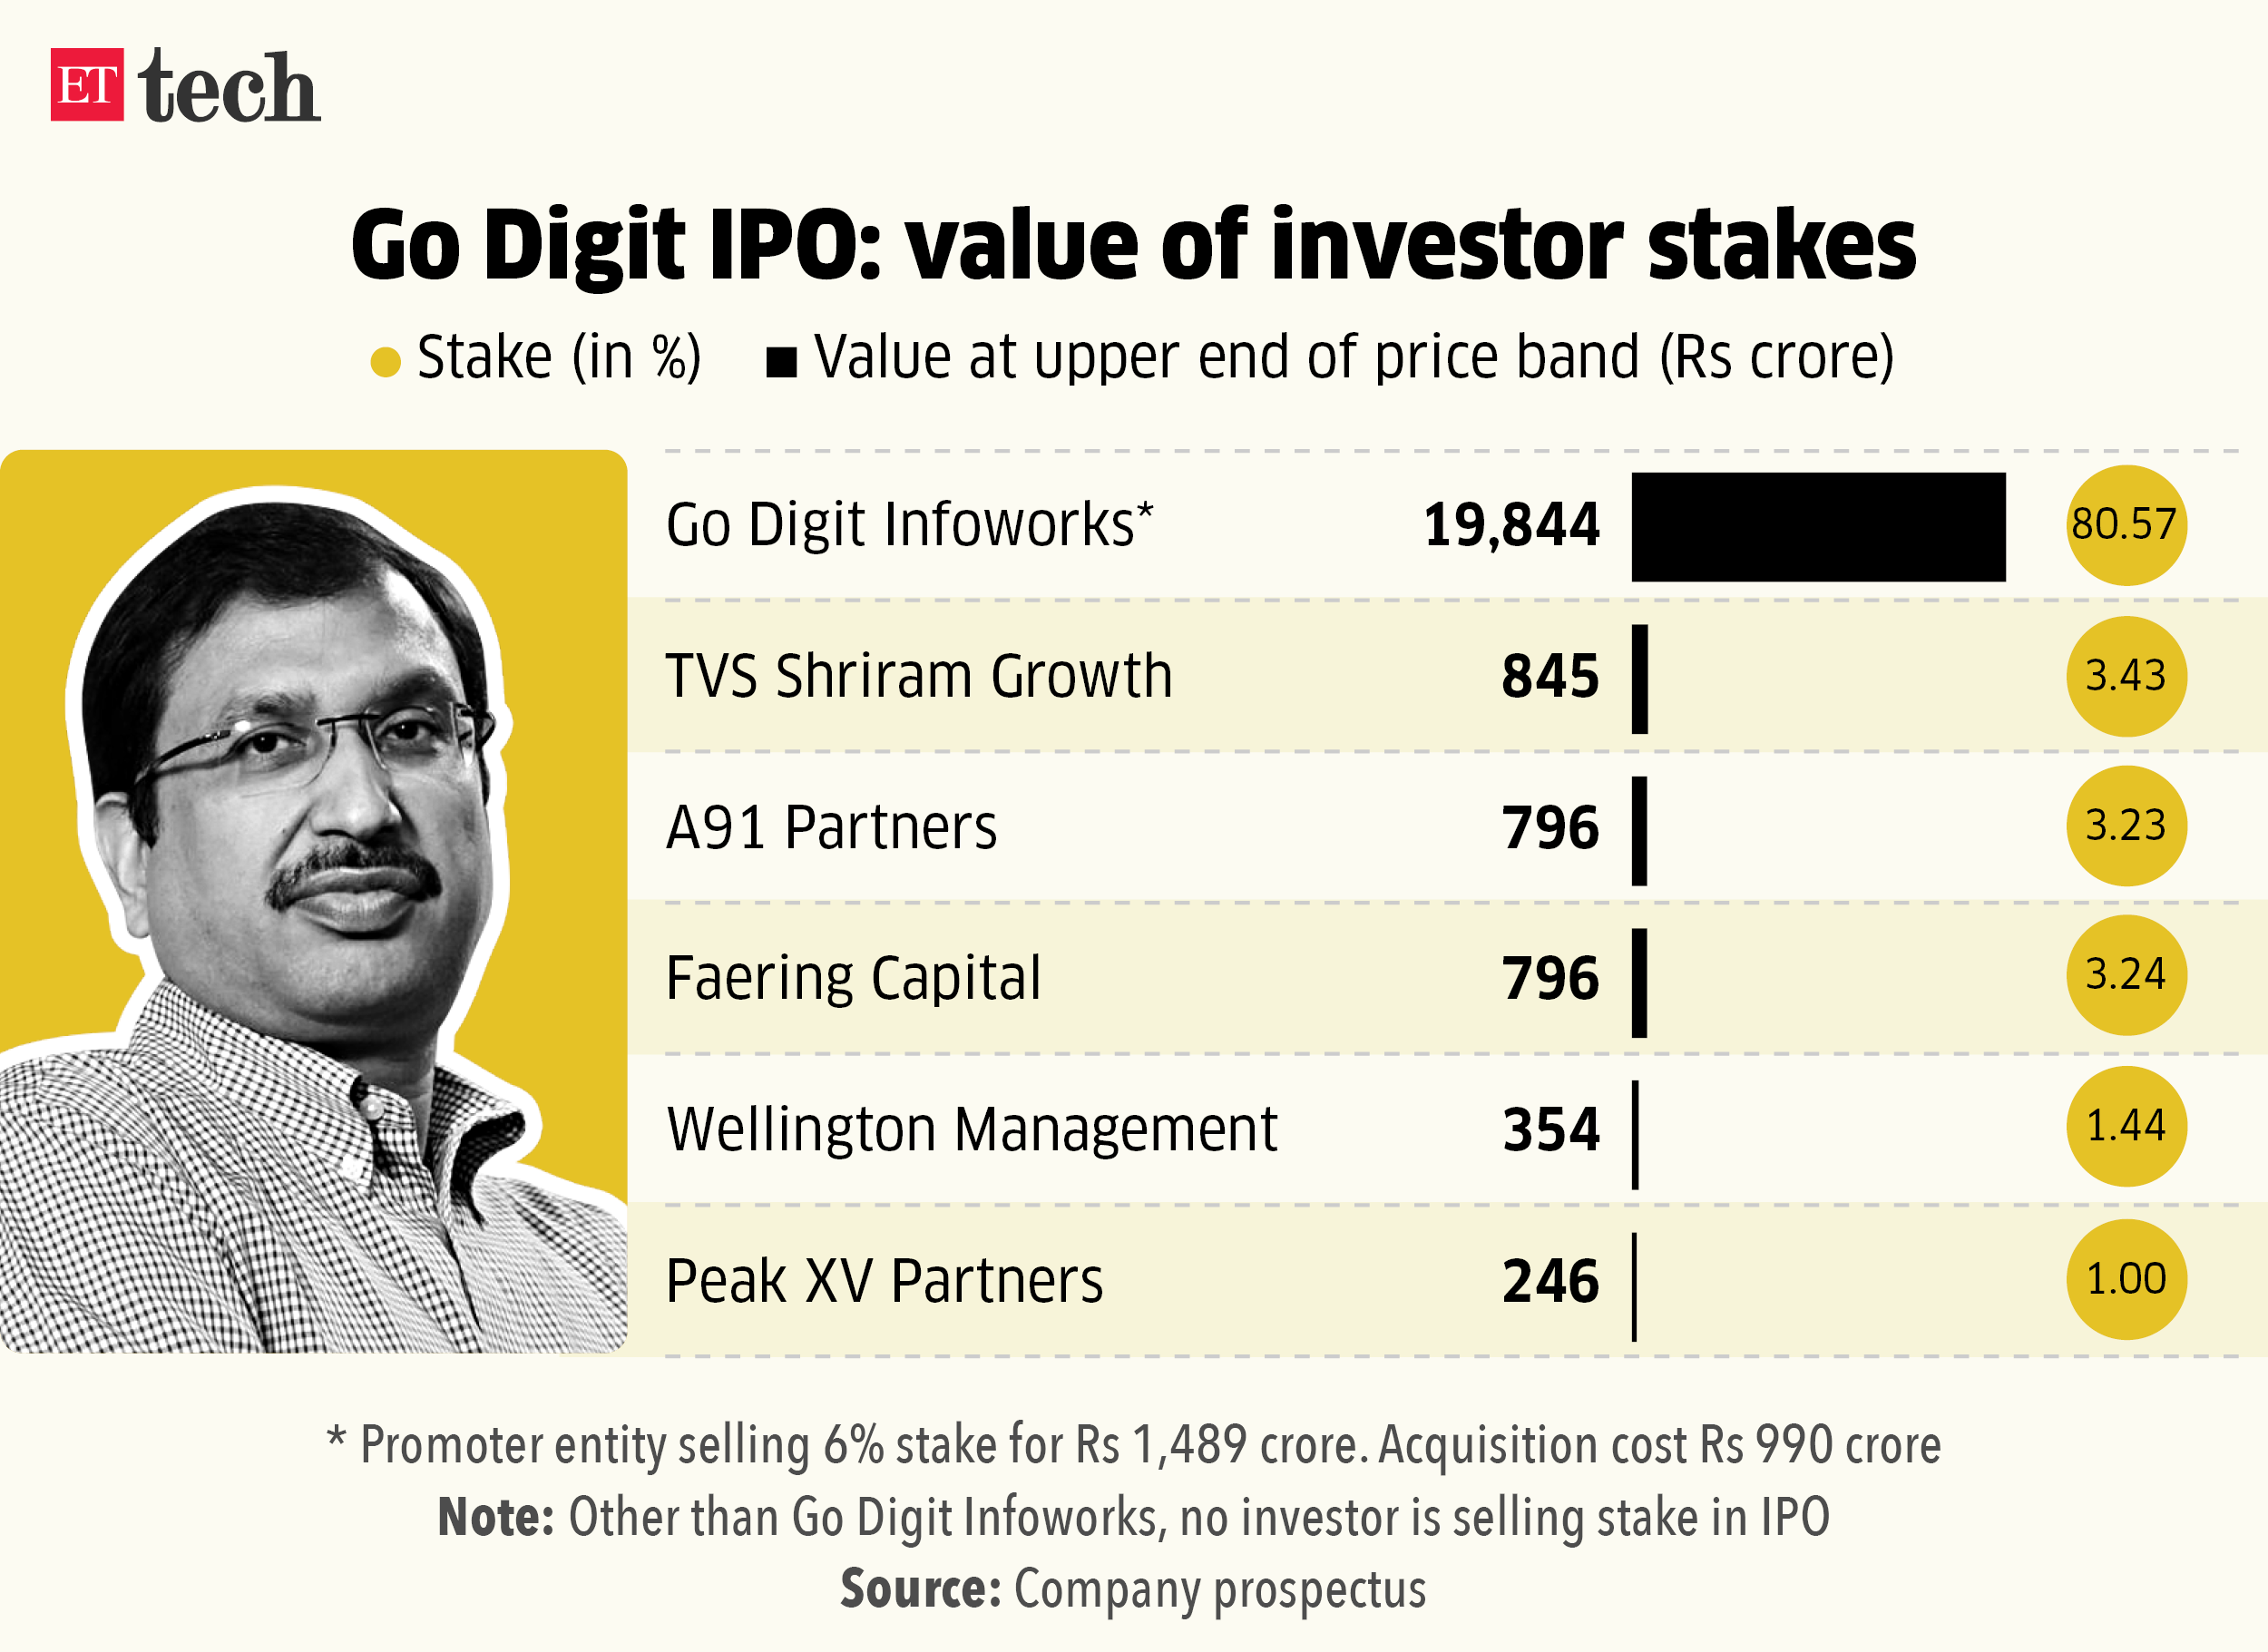 Go Digit IPO value of investor stakes